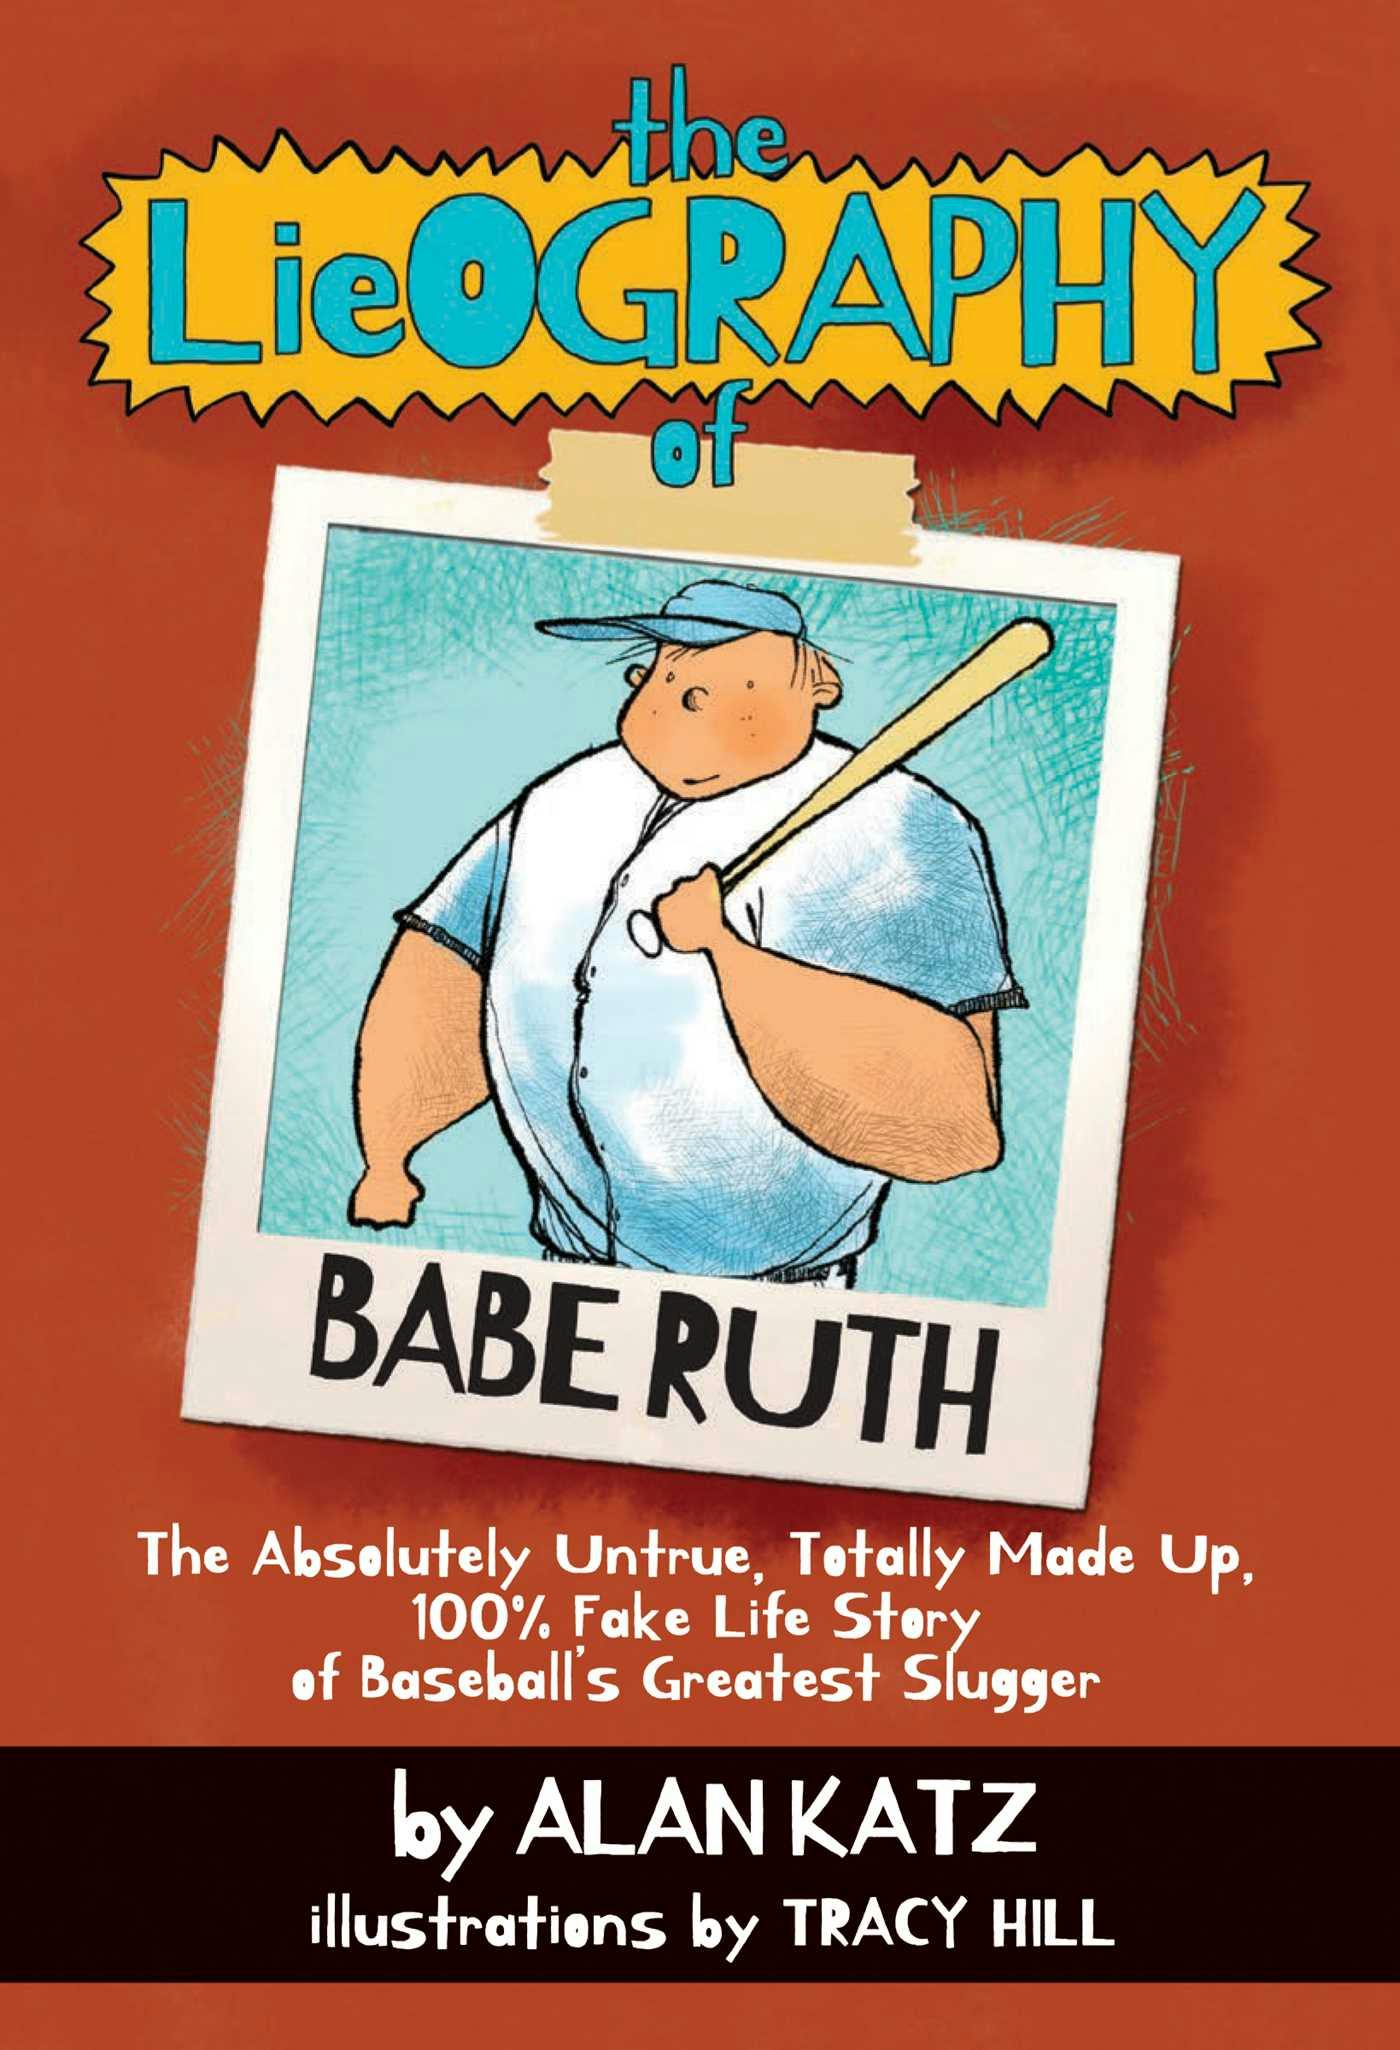 The Lieography of Babe Ruth: The Absolutely Untrue, Totally Made Up, 100% Fake Life Story of Baseball's Greatest Slugger - Alan Katz